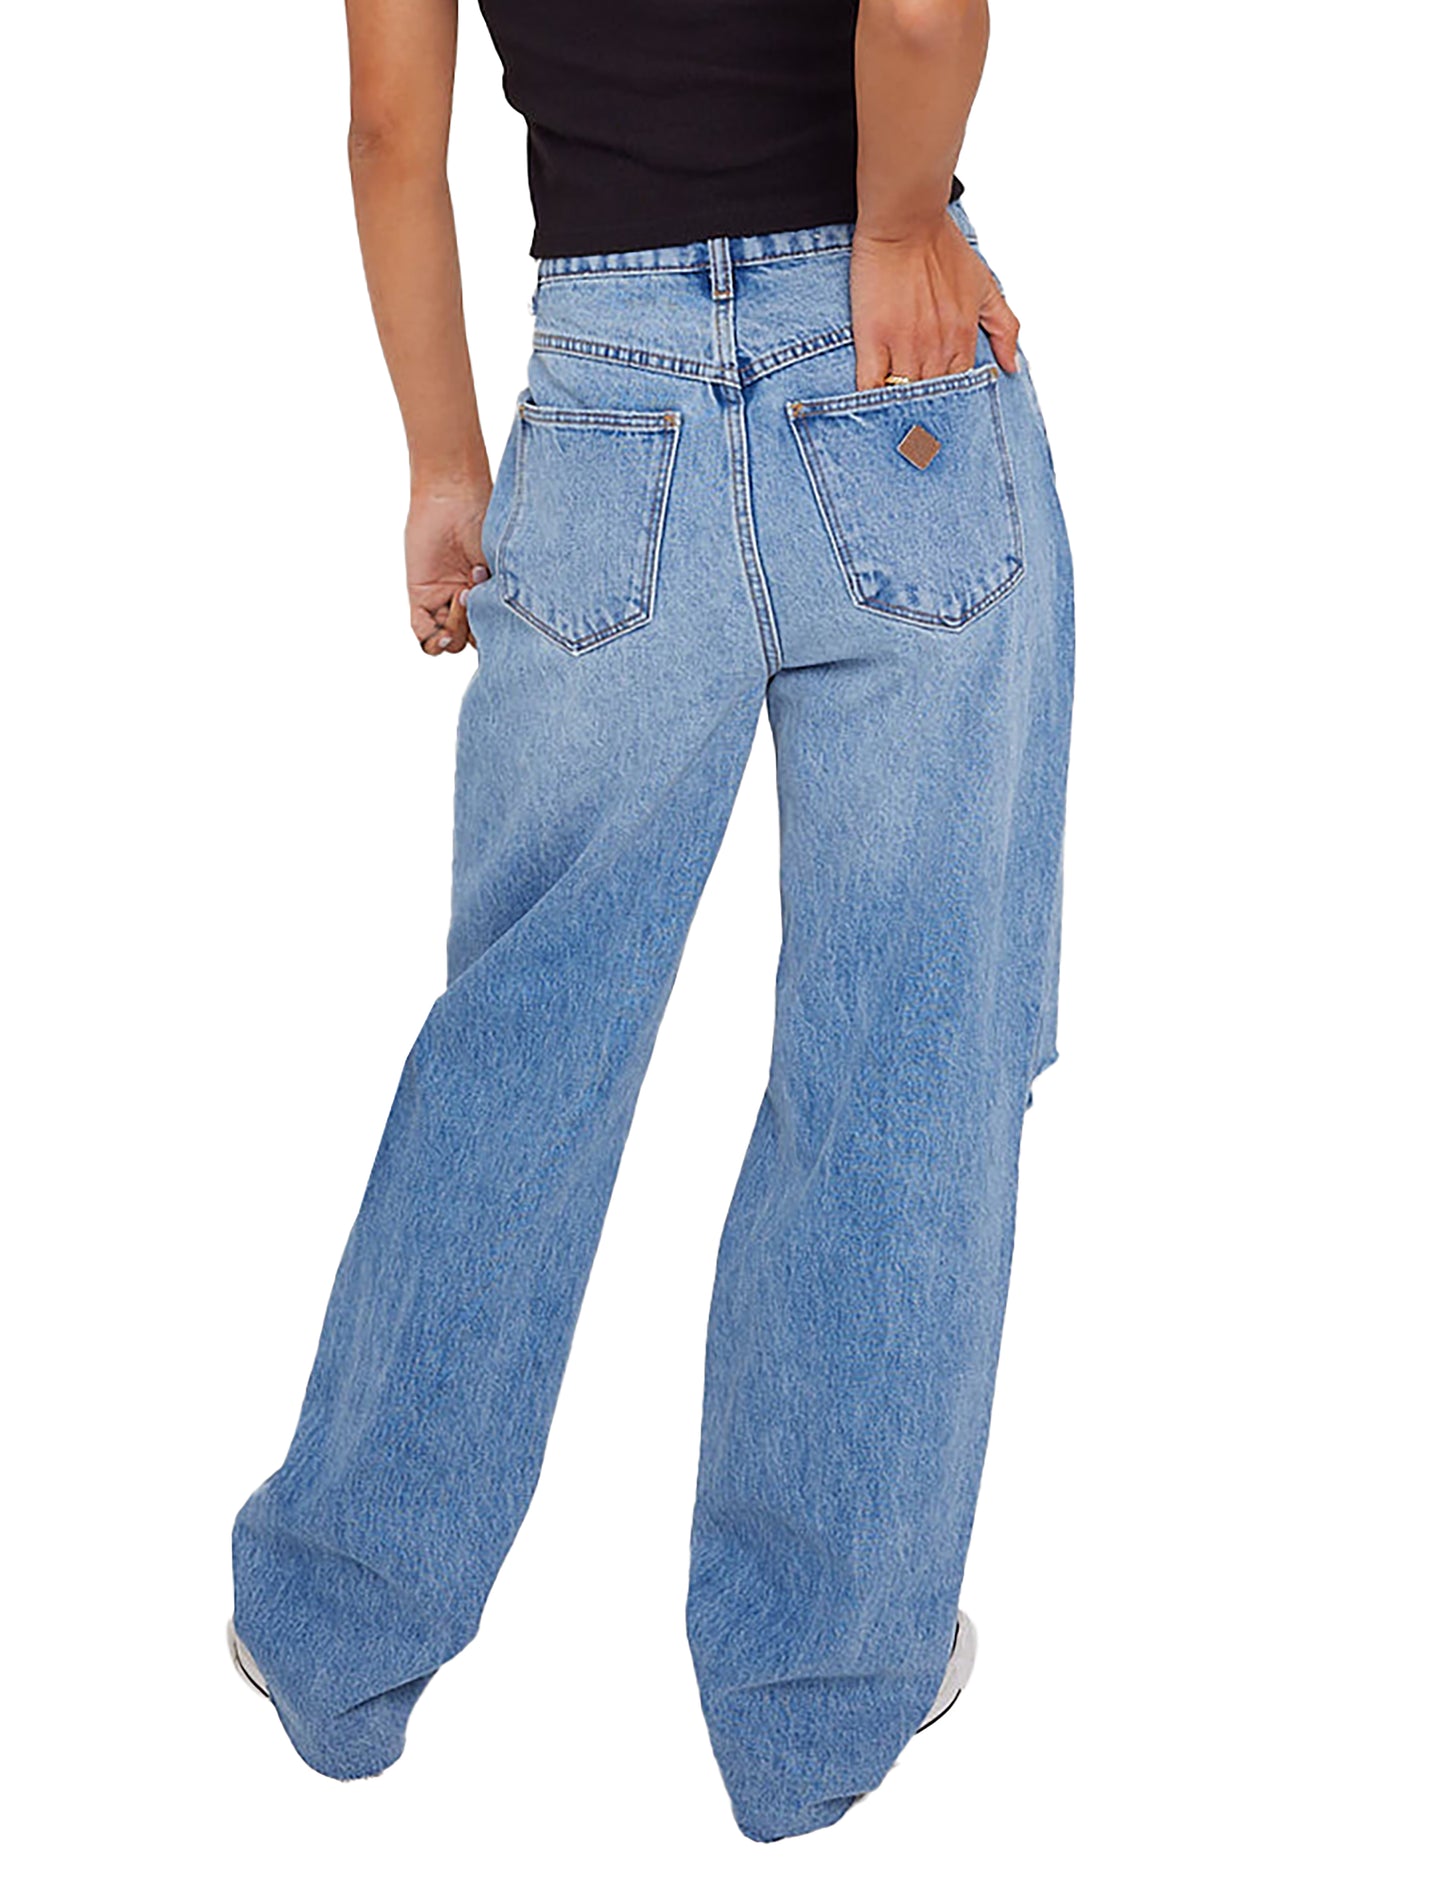 Abrand Carrie Jean Britt Rip Rcy IN Mid Vintage Blue